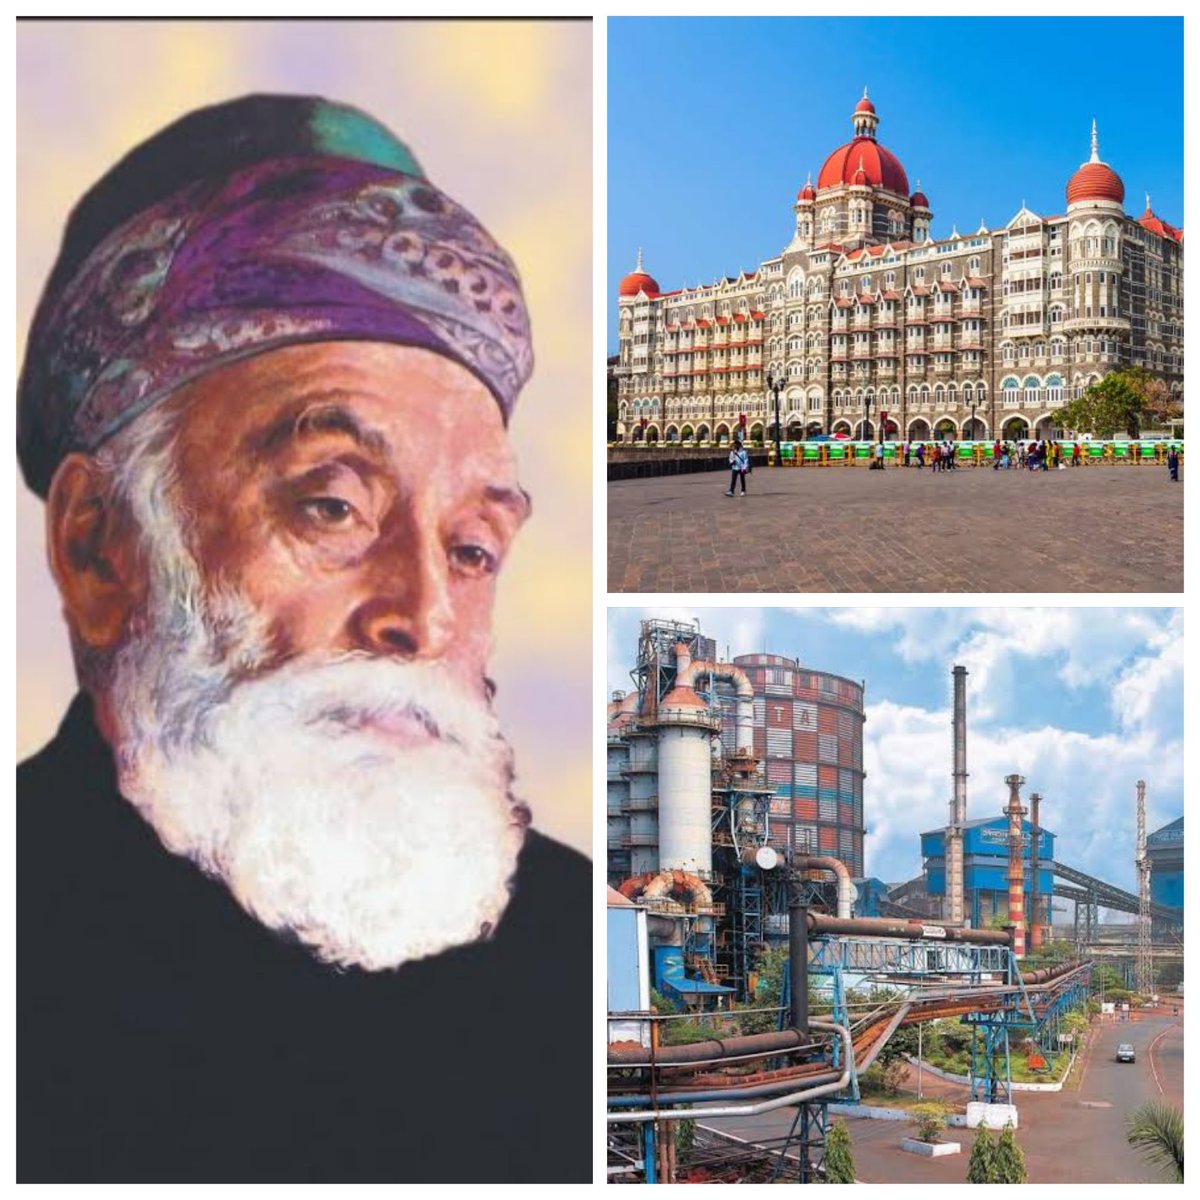 #OnThisDay : 

India's visionary industrialist #JamsetjiTata was born on March 3, 1839 in #Navsari

In 1868, #Jamsetji founded a trading company that evolved into the #TataGroup - a $125 bn conglomerate

He established the city of #Jamshedpur and also the iconic #TajMahalHotel